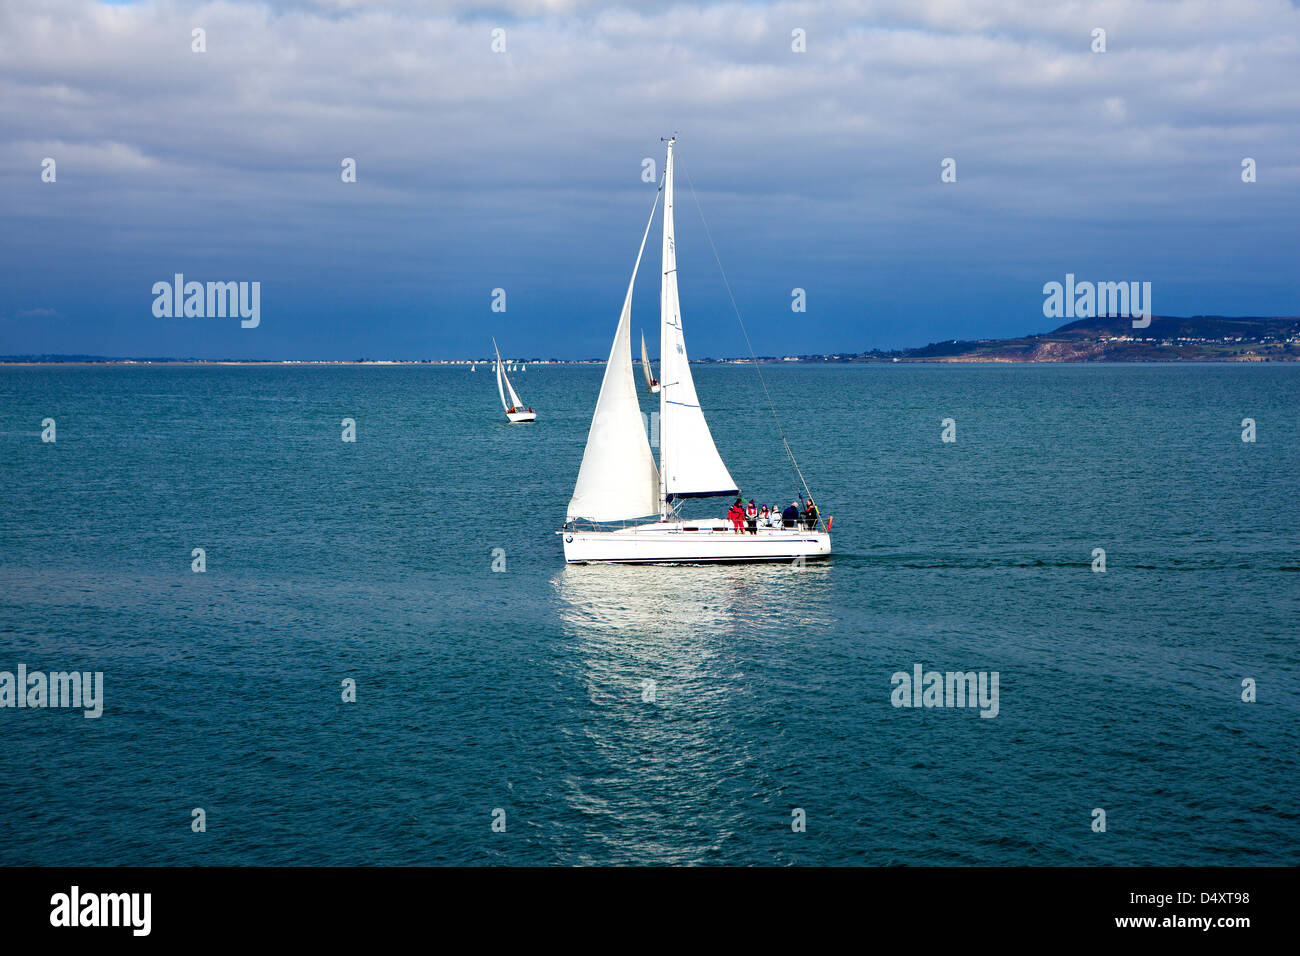 Landscape image of a yacht sailing in the ocean near Dun Laioghaire in Dublin, Ireland. Stock Photo